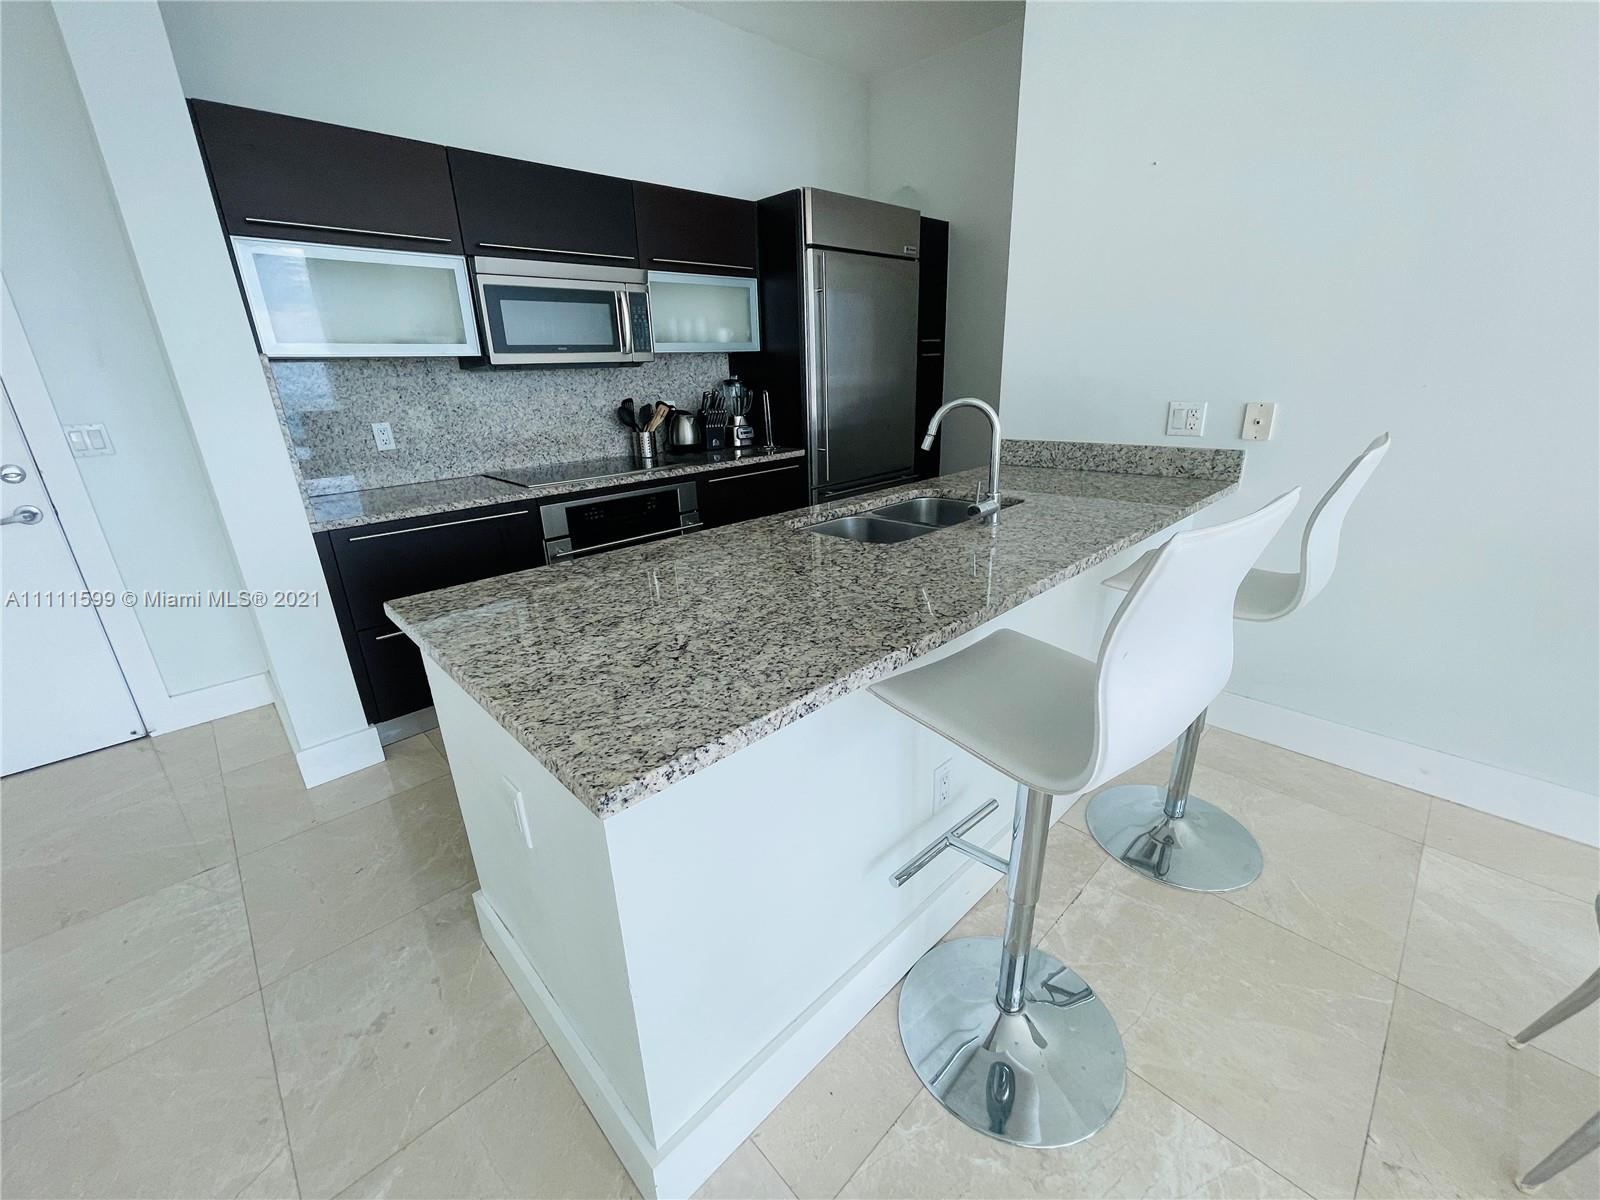 a kitchen with kitchen island a sink stainless steel appliances and a counter top